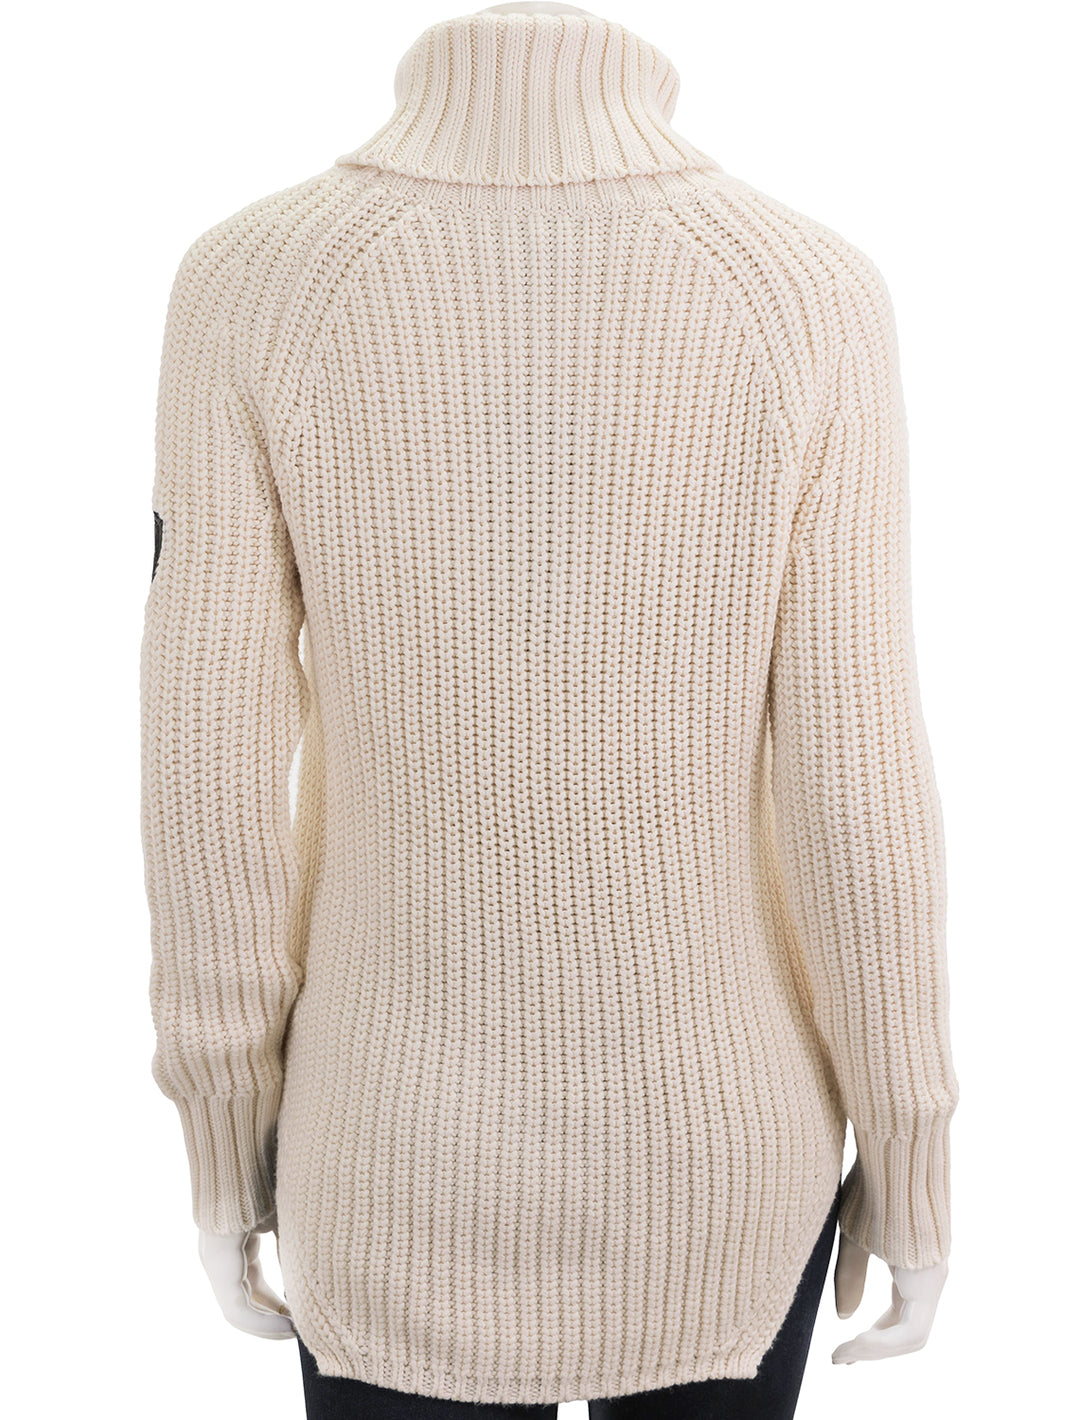 Back view of Alp N Rock's simone sweater in ivory.